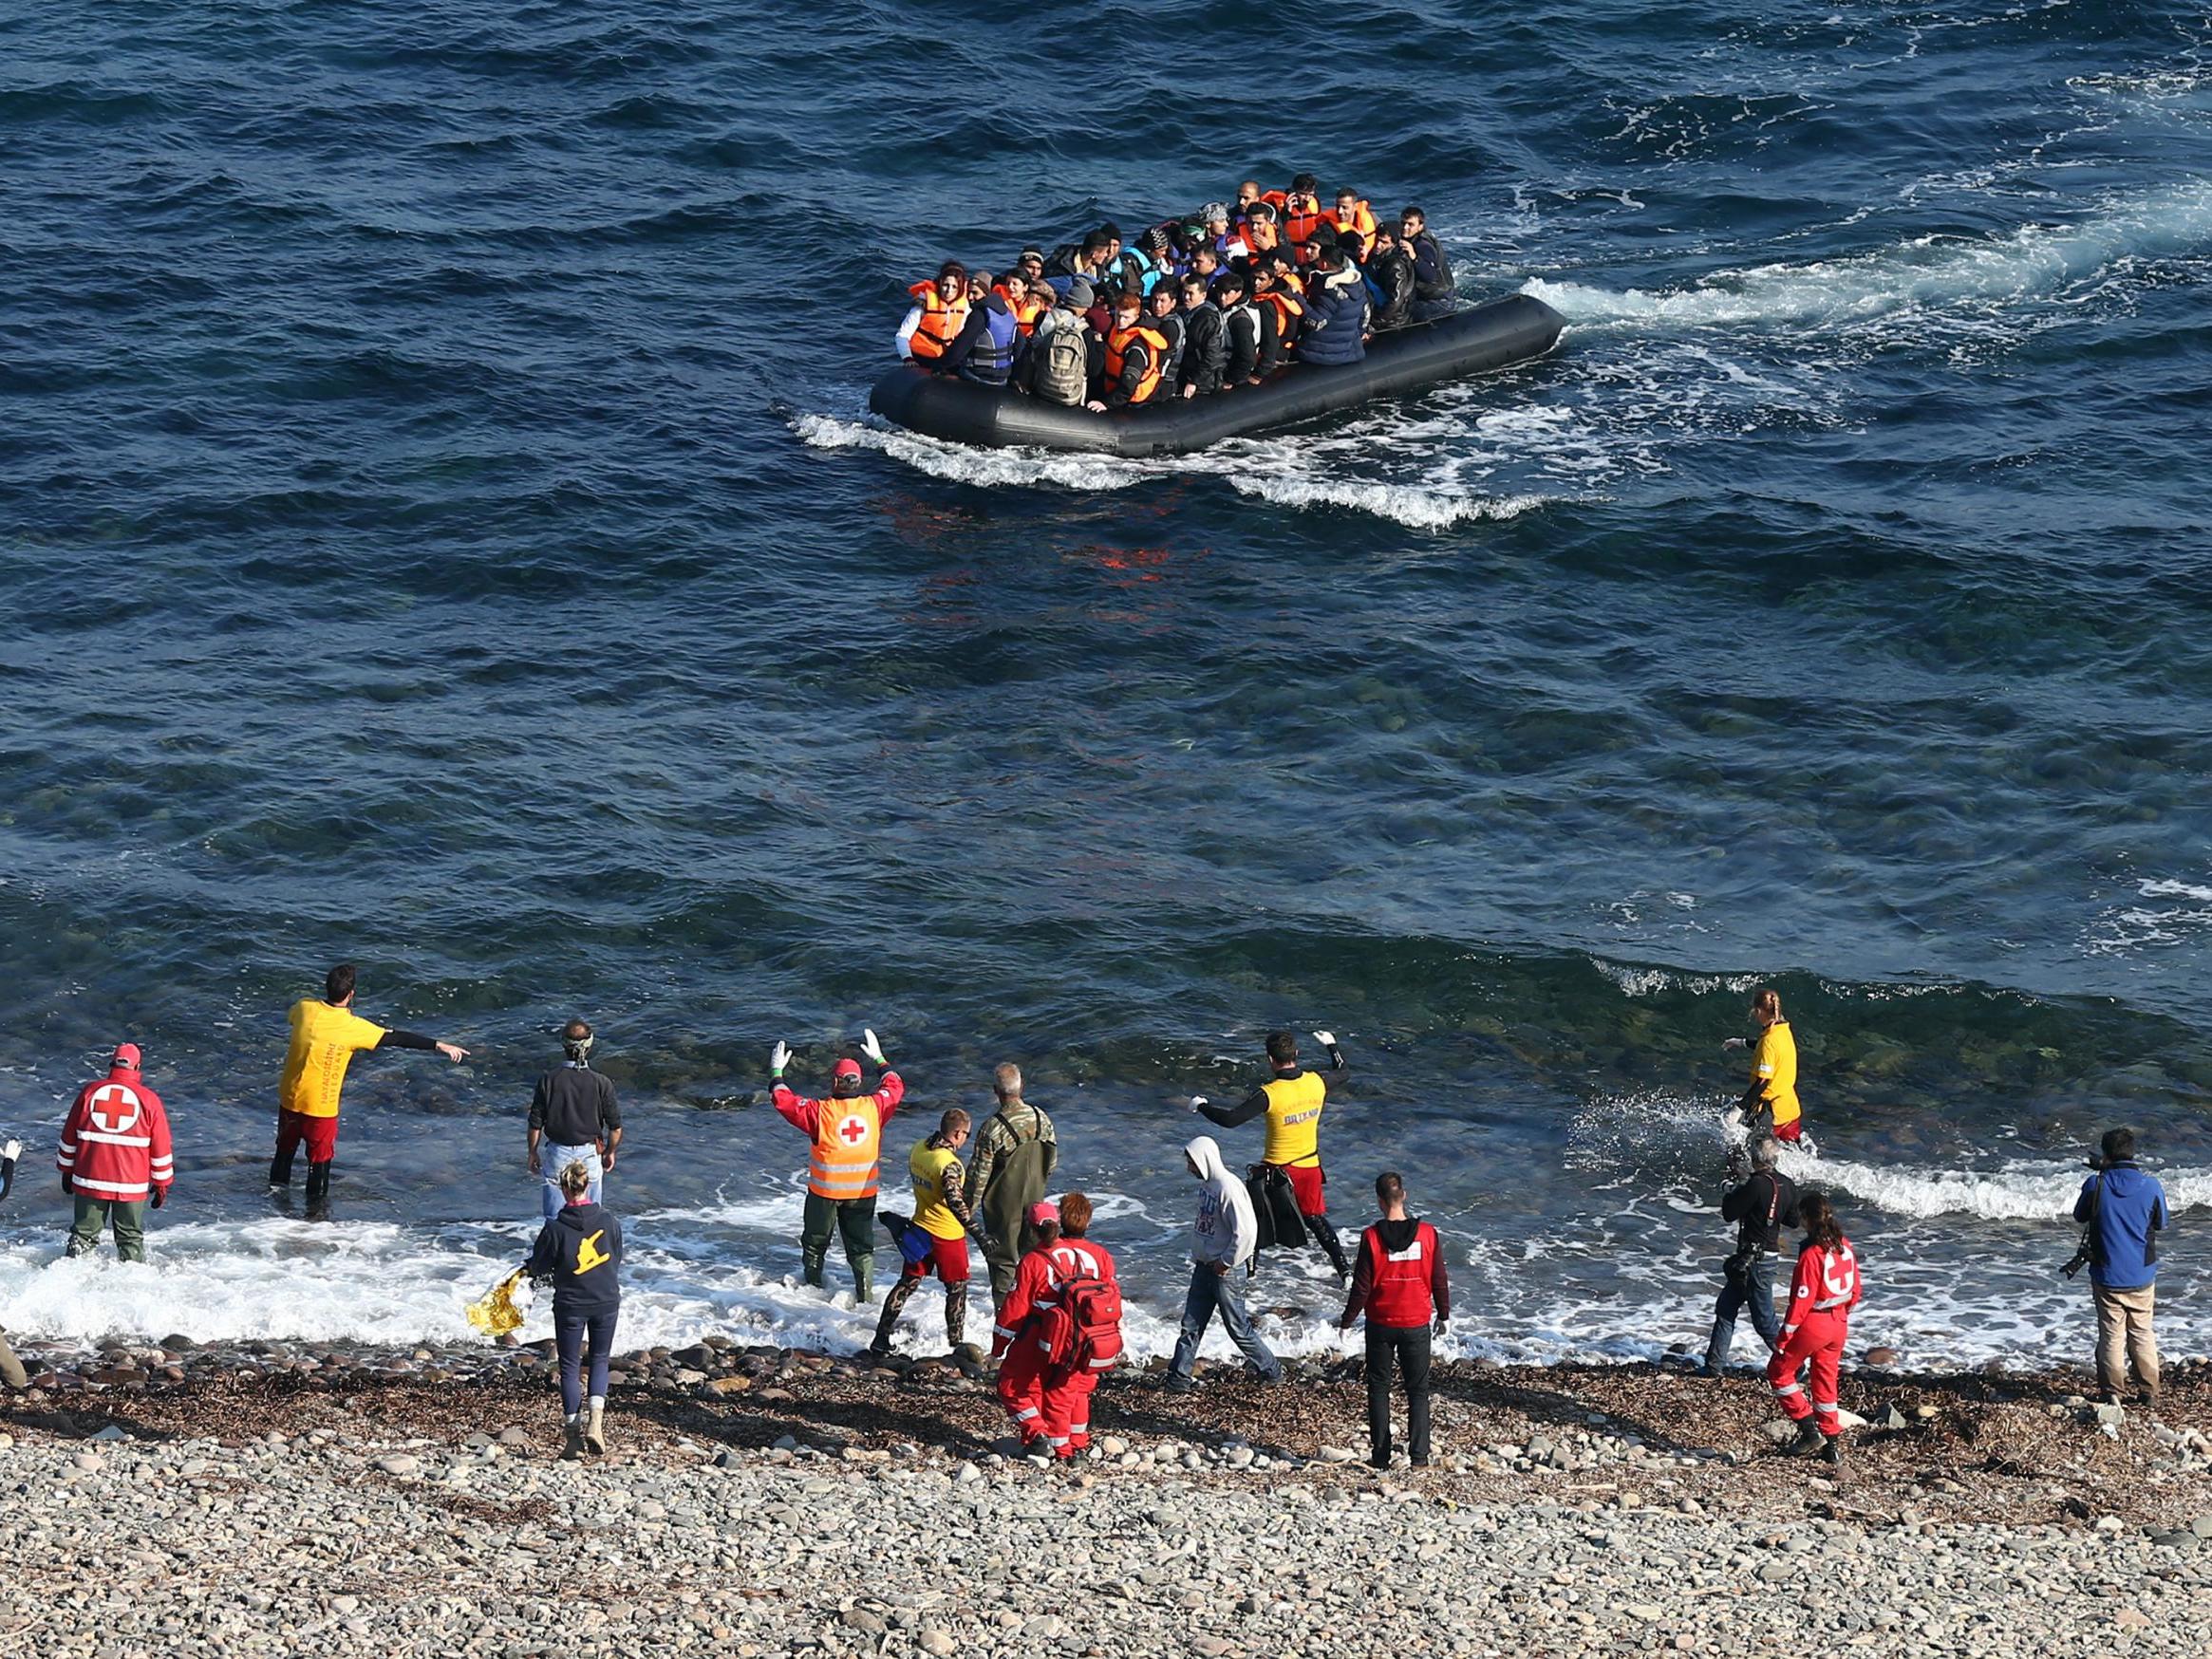 Aid workers gesture at a migrant boat as it approaches shore after making the crossing from Turkey to the Greek island of Lesbos on 17 November, 2015, in Sikaminias, Greece.